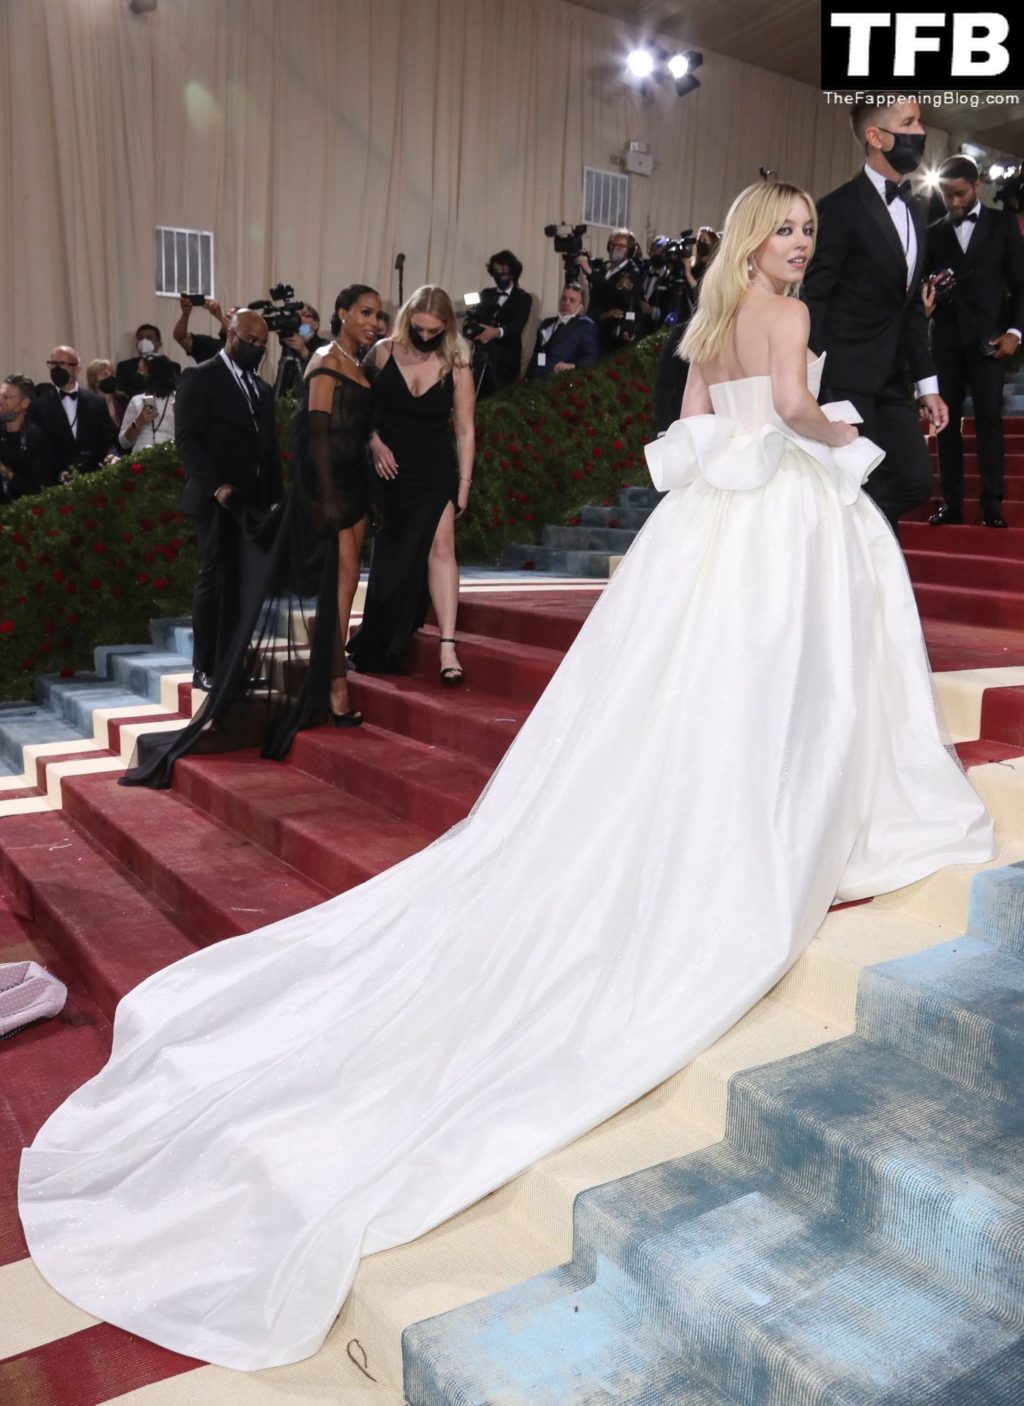 Sydney Sweeney Sexy The Fappening Blog 3 1024x1406 - Sydney Sweeney Looks Hot in White at The 2022 Met Gala in NYC (132 Photos)